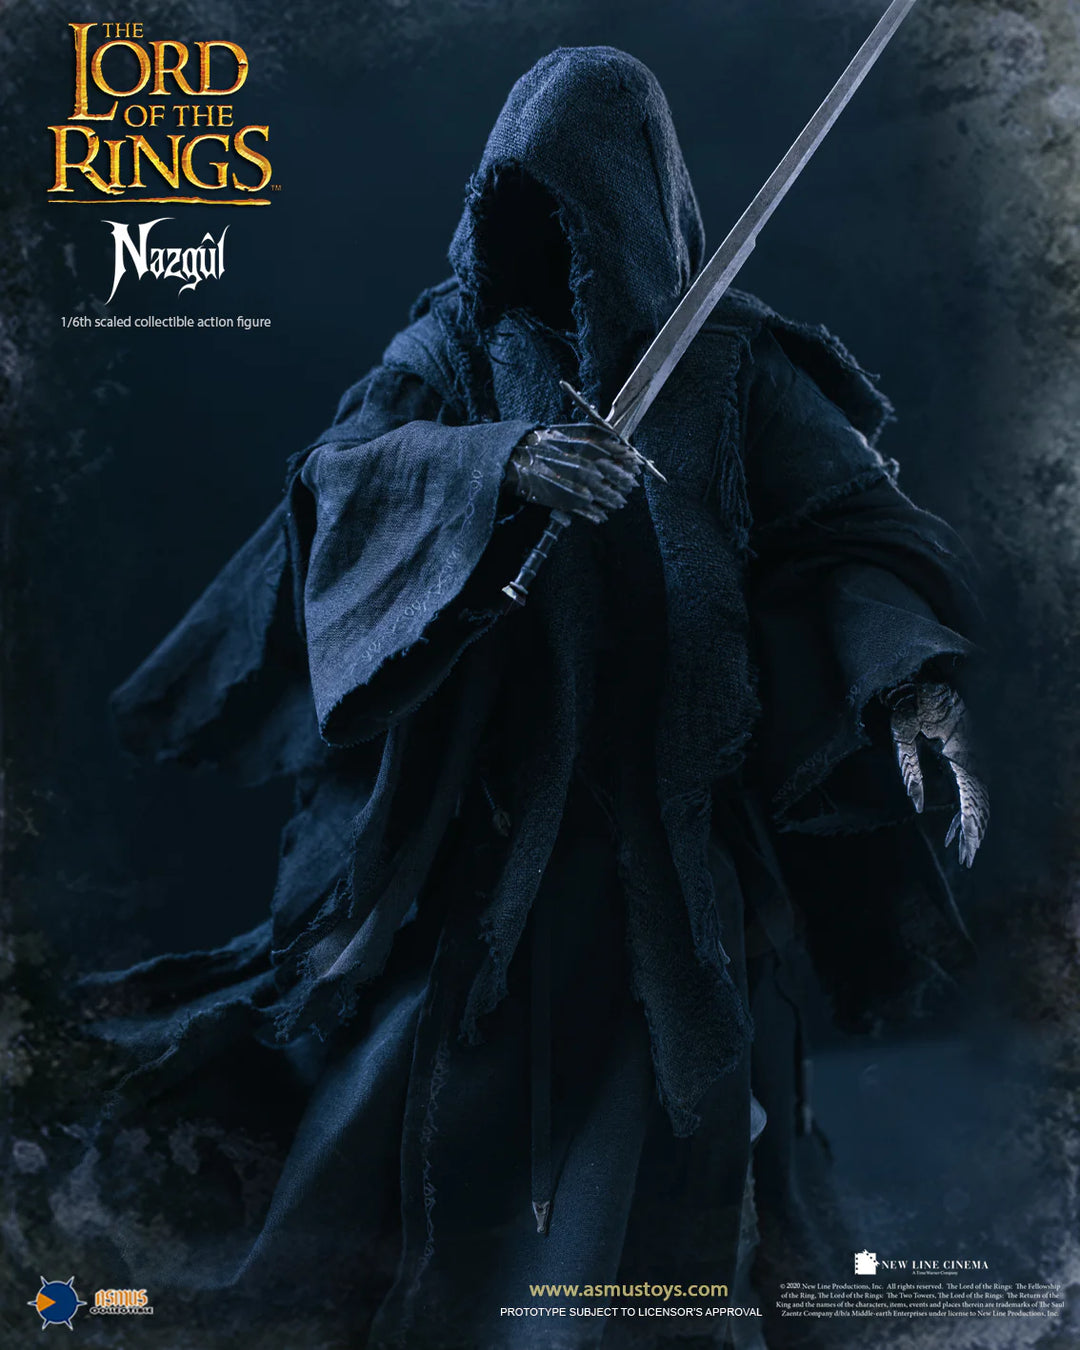 The Lord of the Rings Nazgul 1/6 Scale Figure